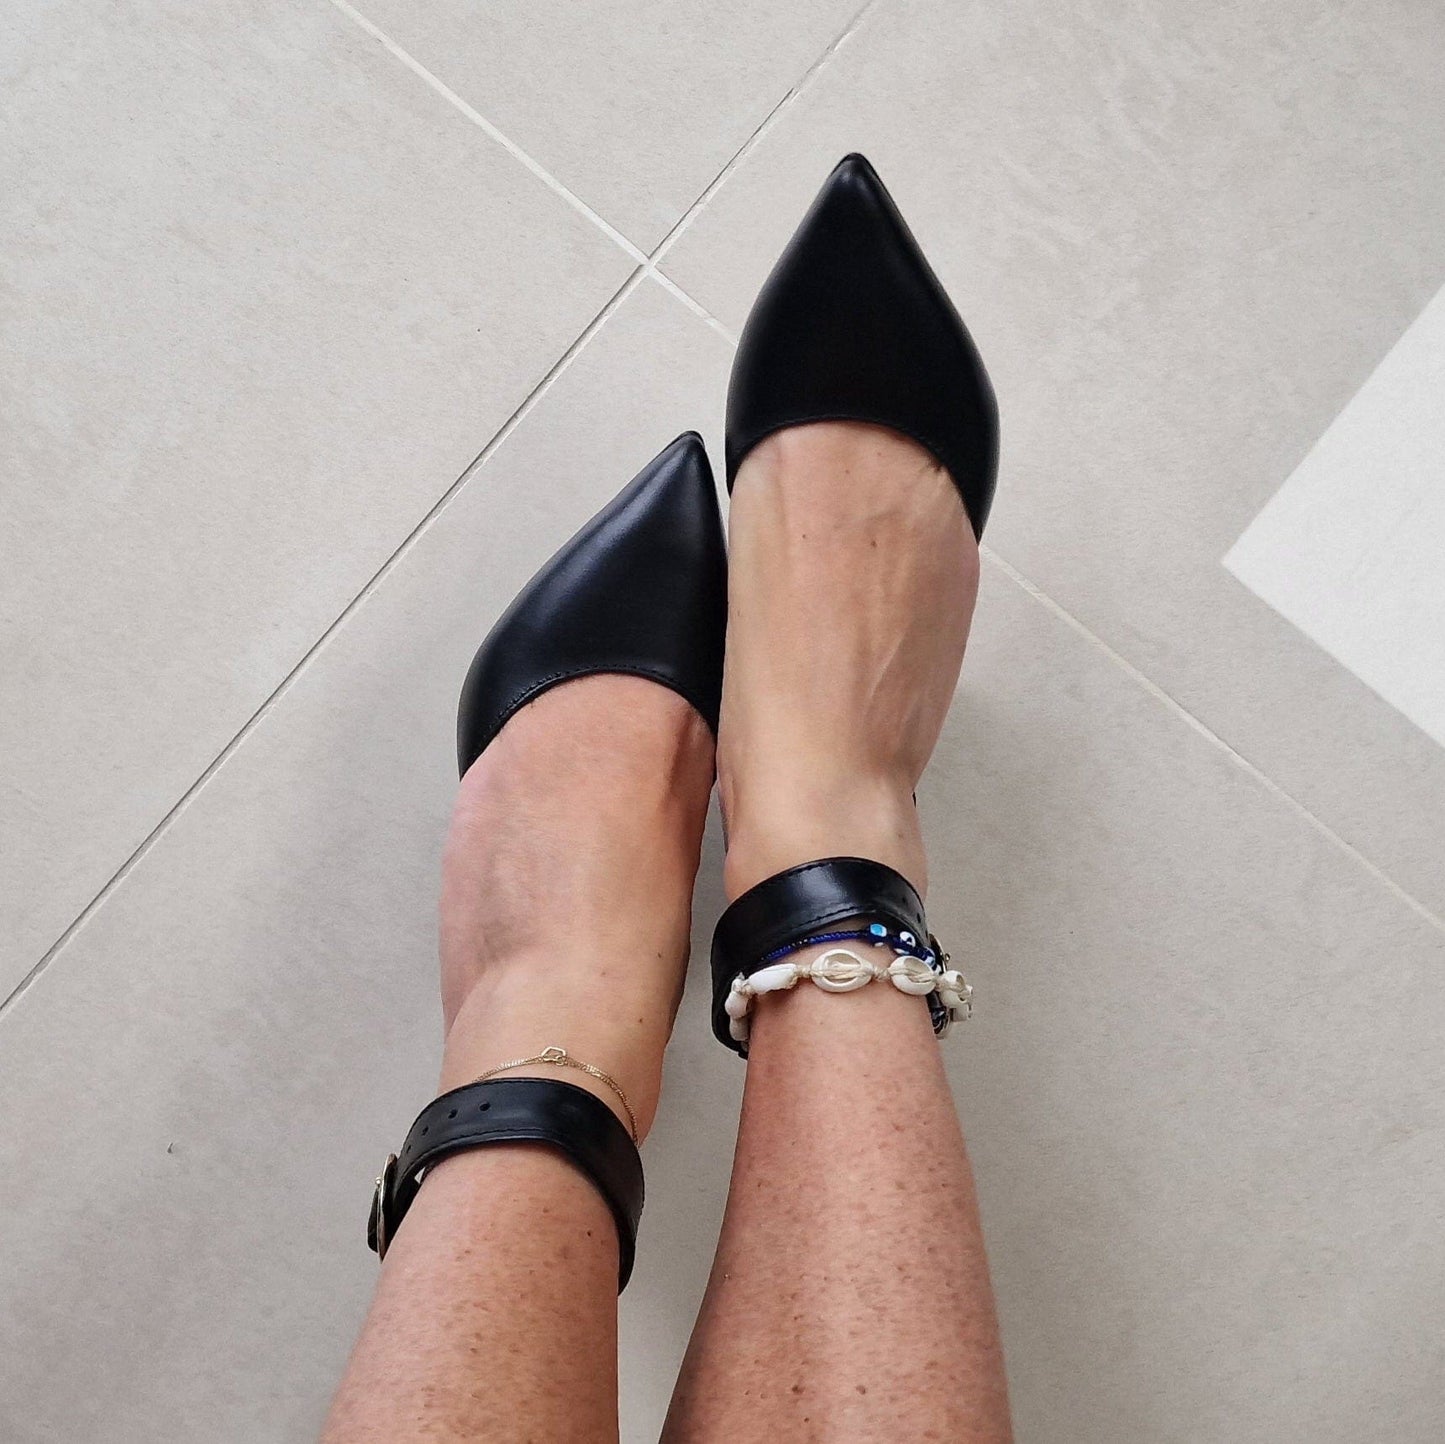 A woman wearing pointed toe black leather heels